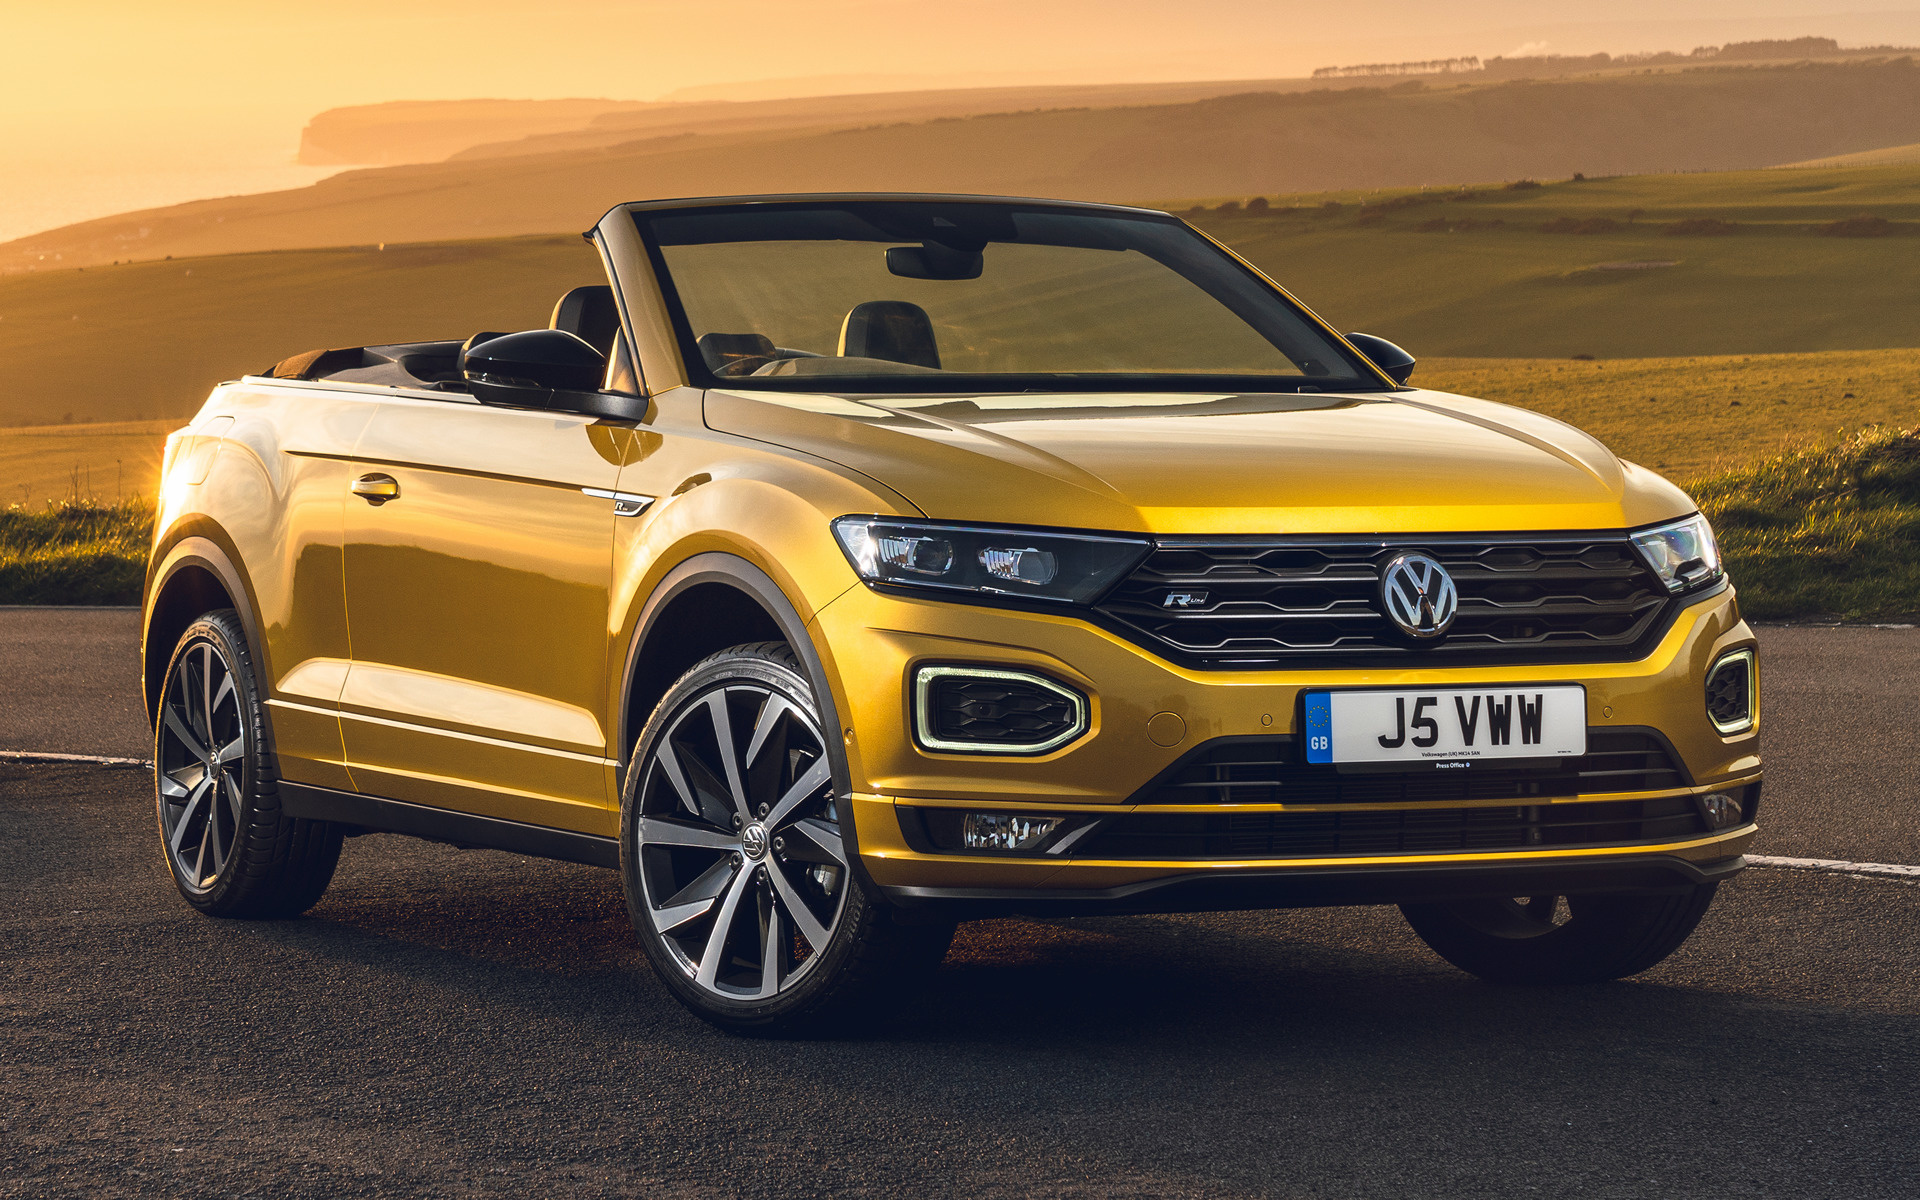 2020 Volkswagen T-Roc Cabriolet R-Line (UK) - Wallpapers and HD Images ...